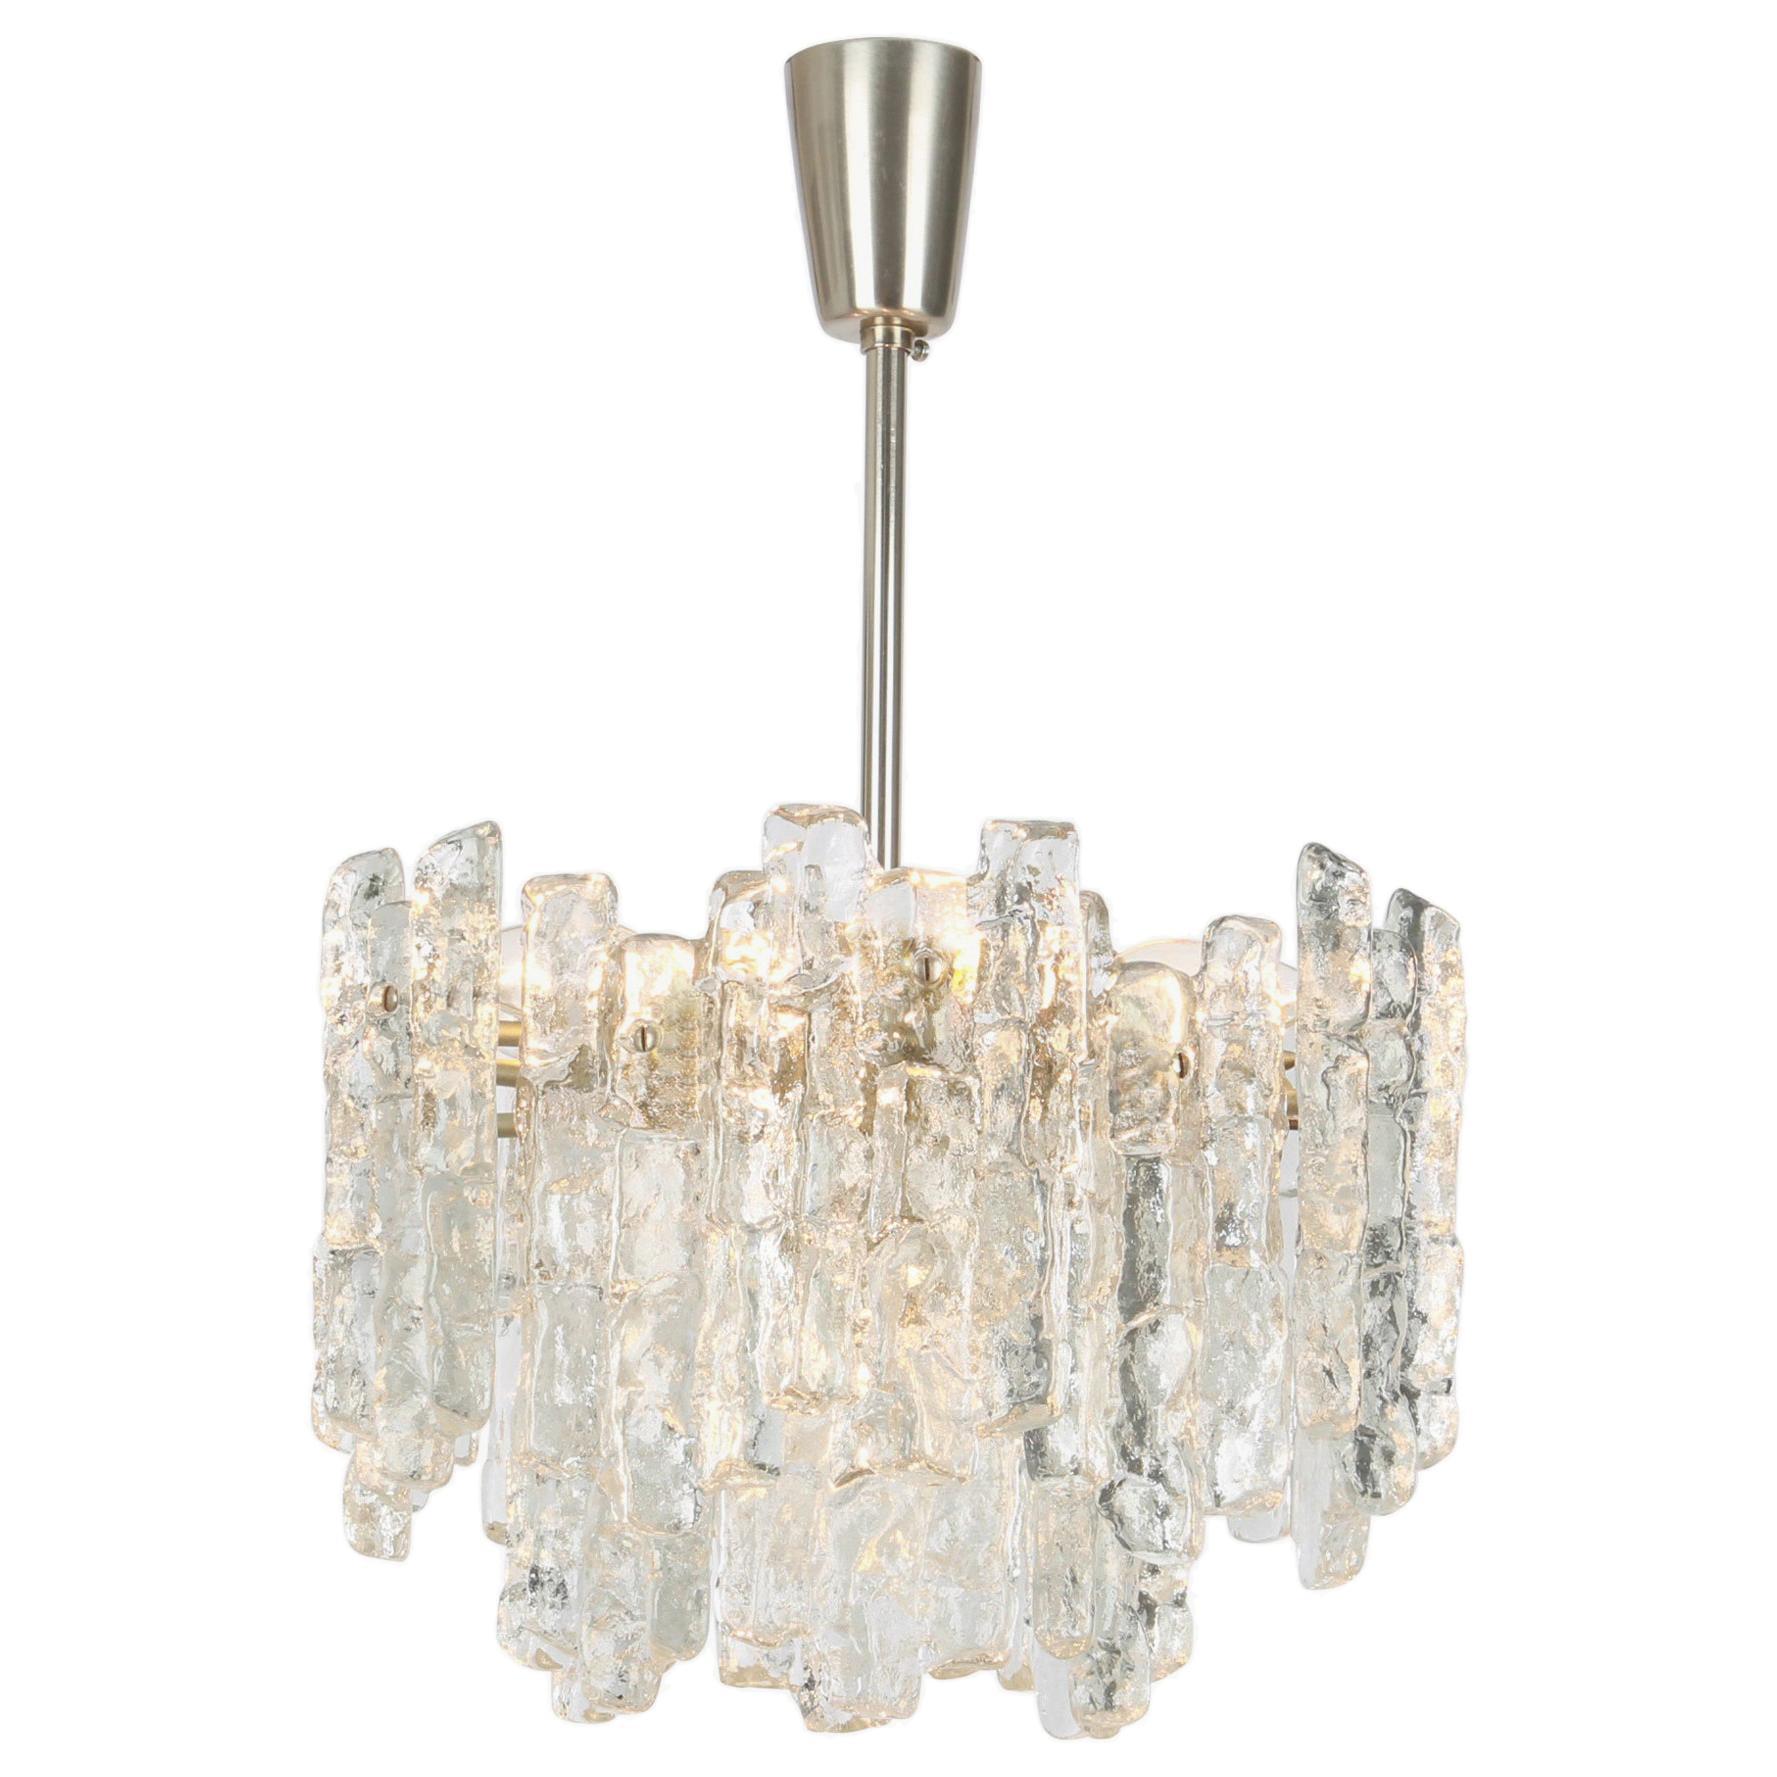 1 of 5 Large Murano Ice Glass Chandelier by Kalmar, Austria, 1960s For Sale 1